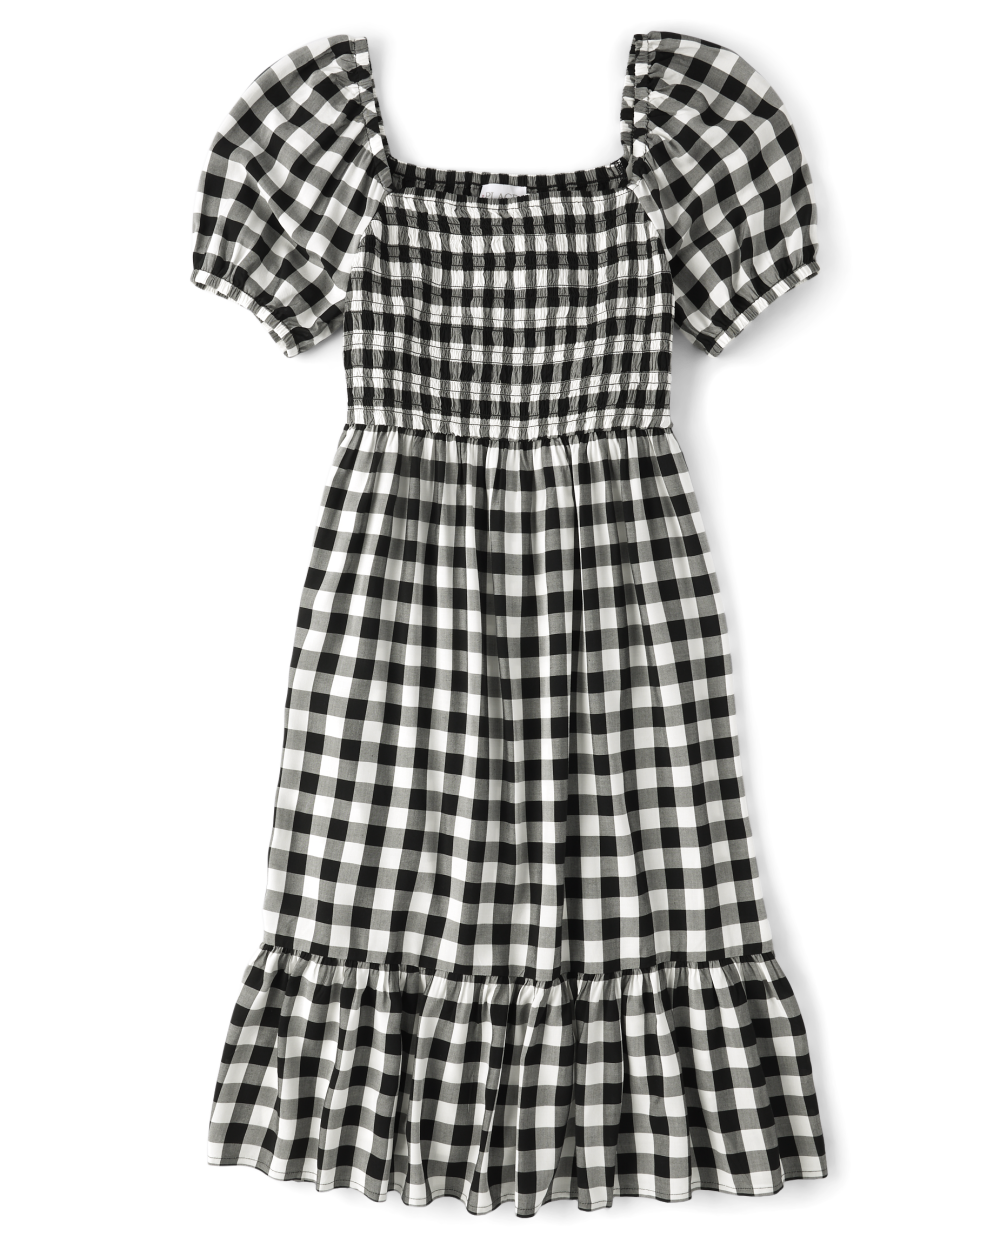 Above the Knee Rayon Smocked Square Neck Checkered Gingham Print Puff Sleeves Short Sleeves Sleeves Dress With Ruffles